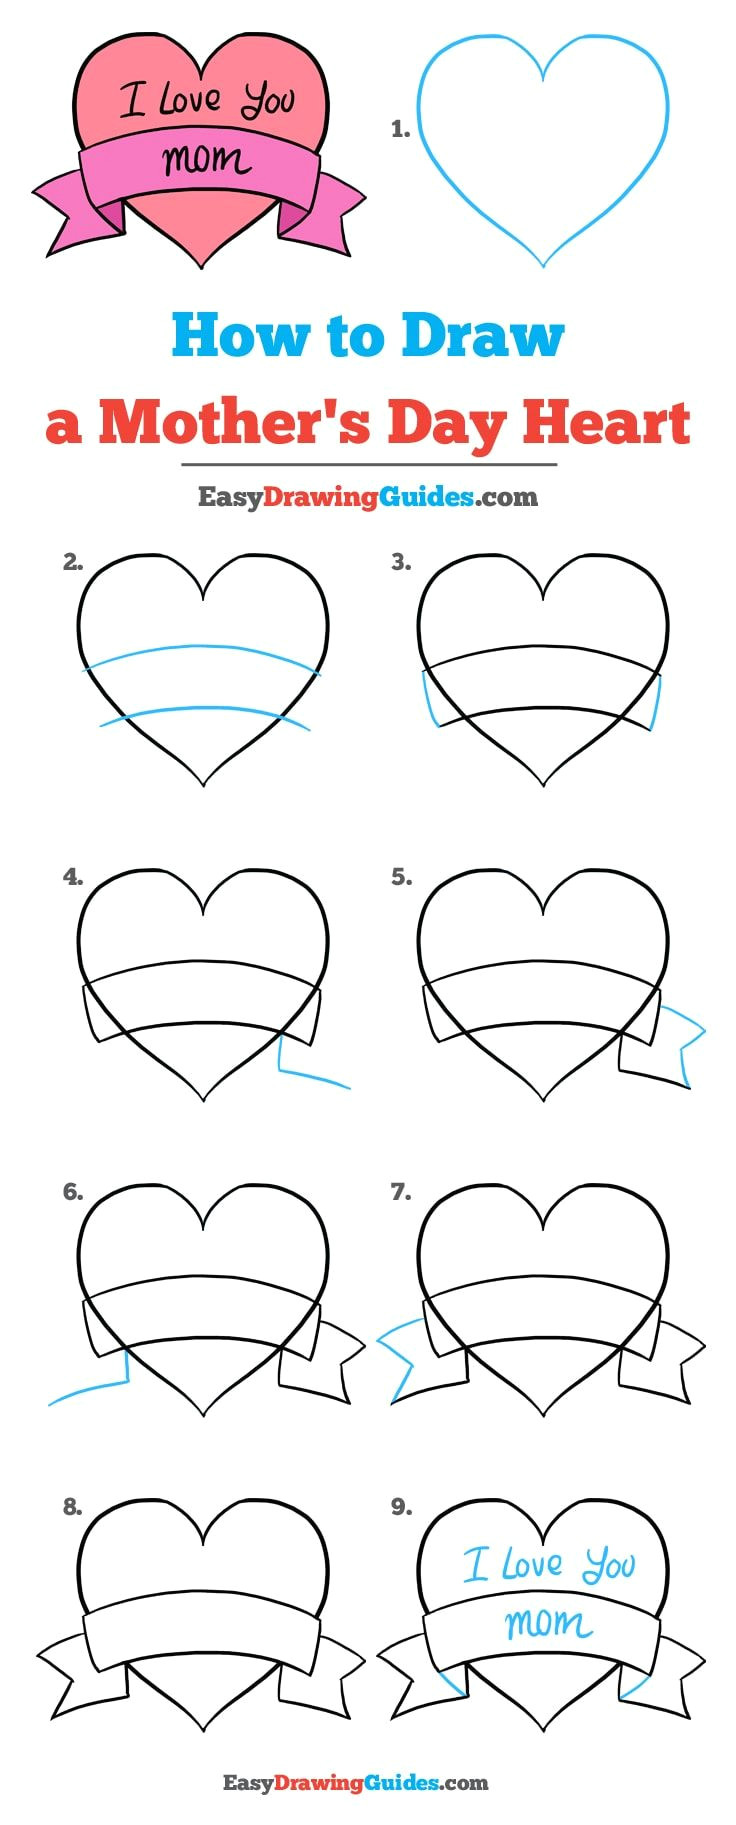 learn how to draw a mother s day heart easy step by step drawing tutorial for kids and beginners mothersday heart drawingtutorial easydrawing see the